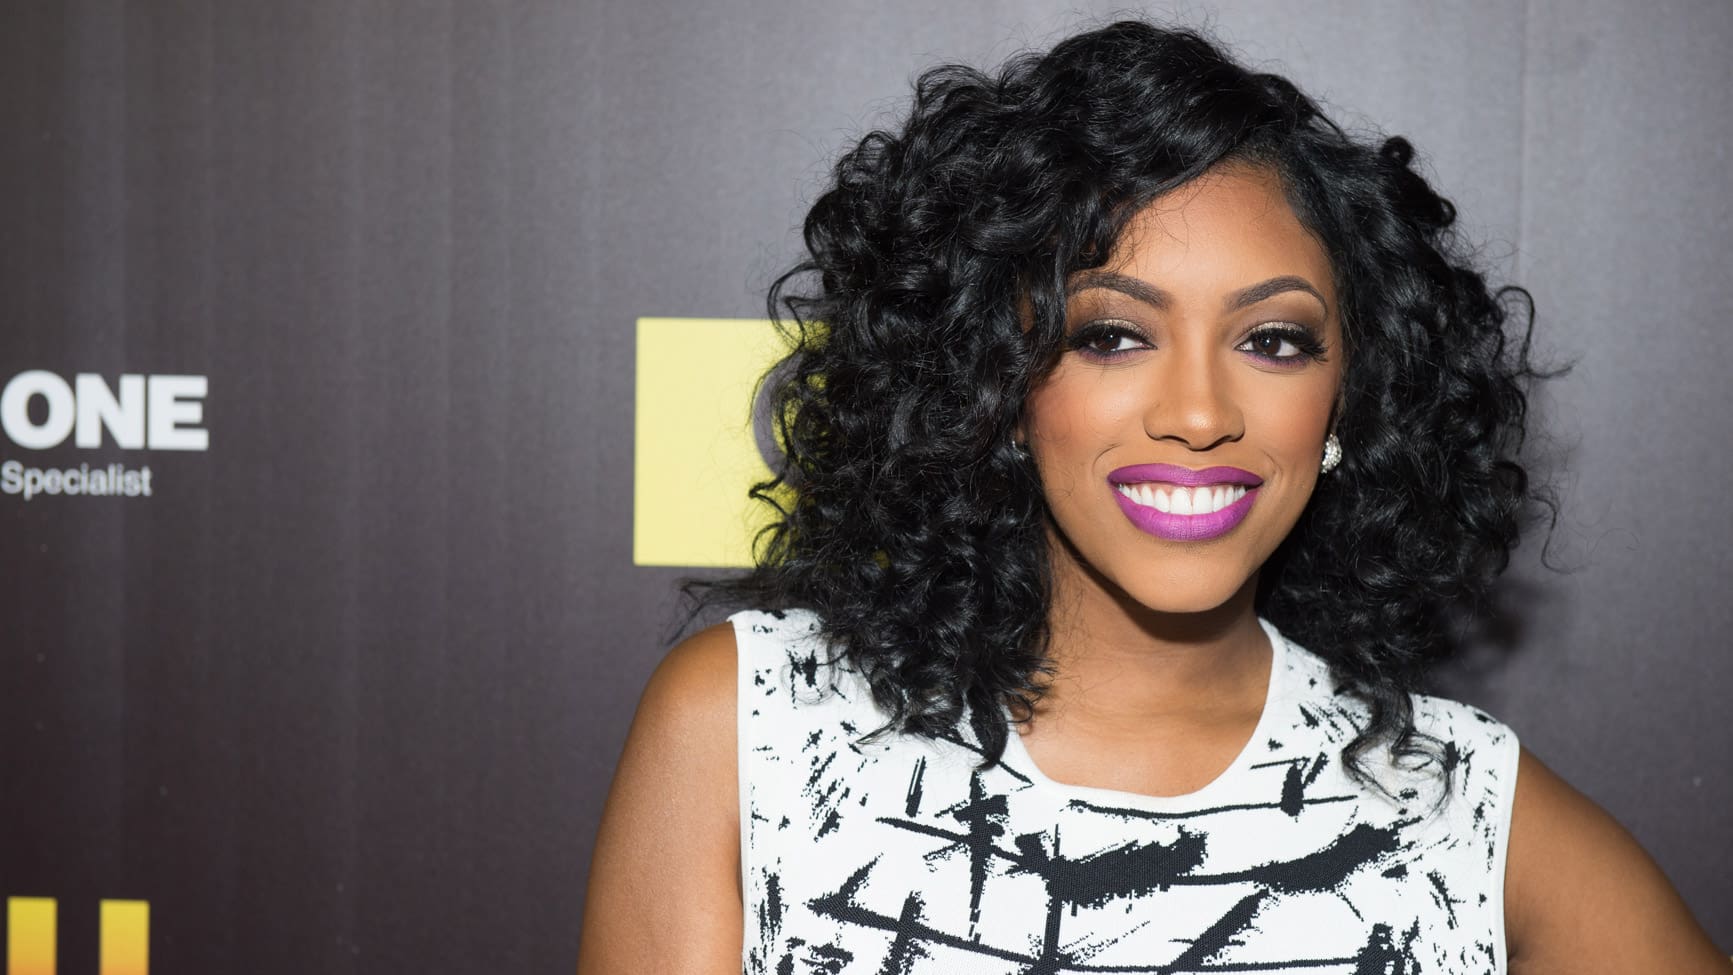 Porsha Williams Is Crazy With Excitement And Tells Fans That Her Daughter Could Come Any Moment - Watch Her Video